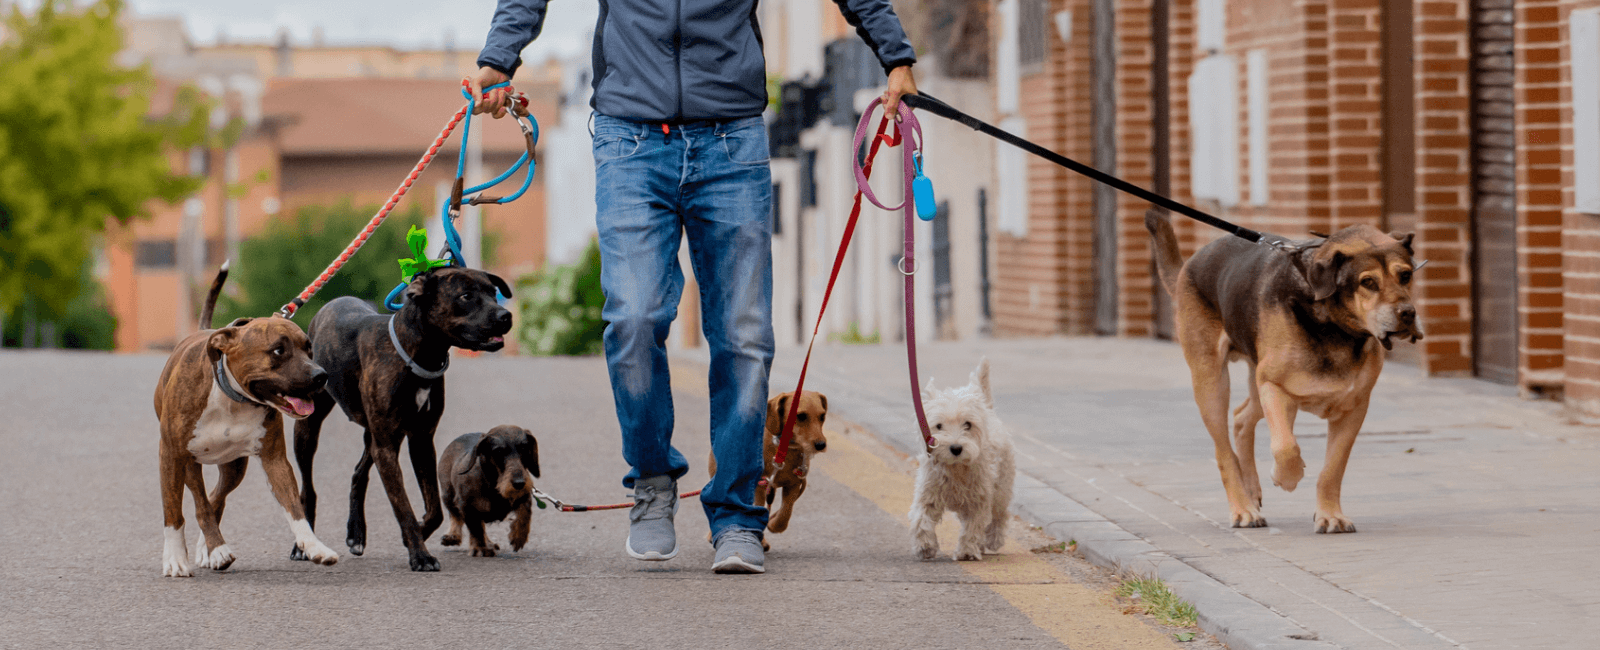 A man walking several dogs